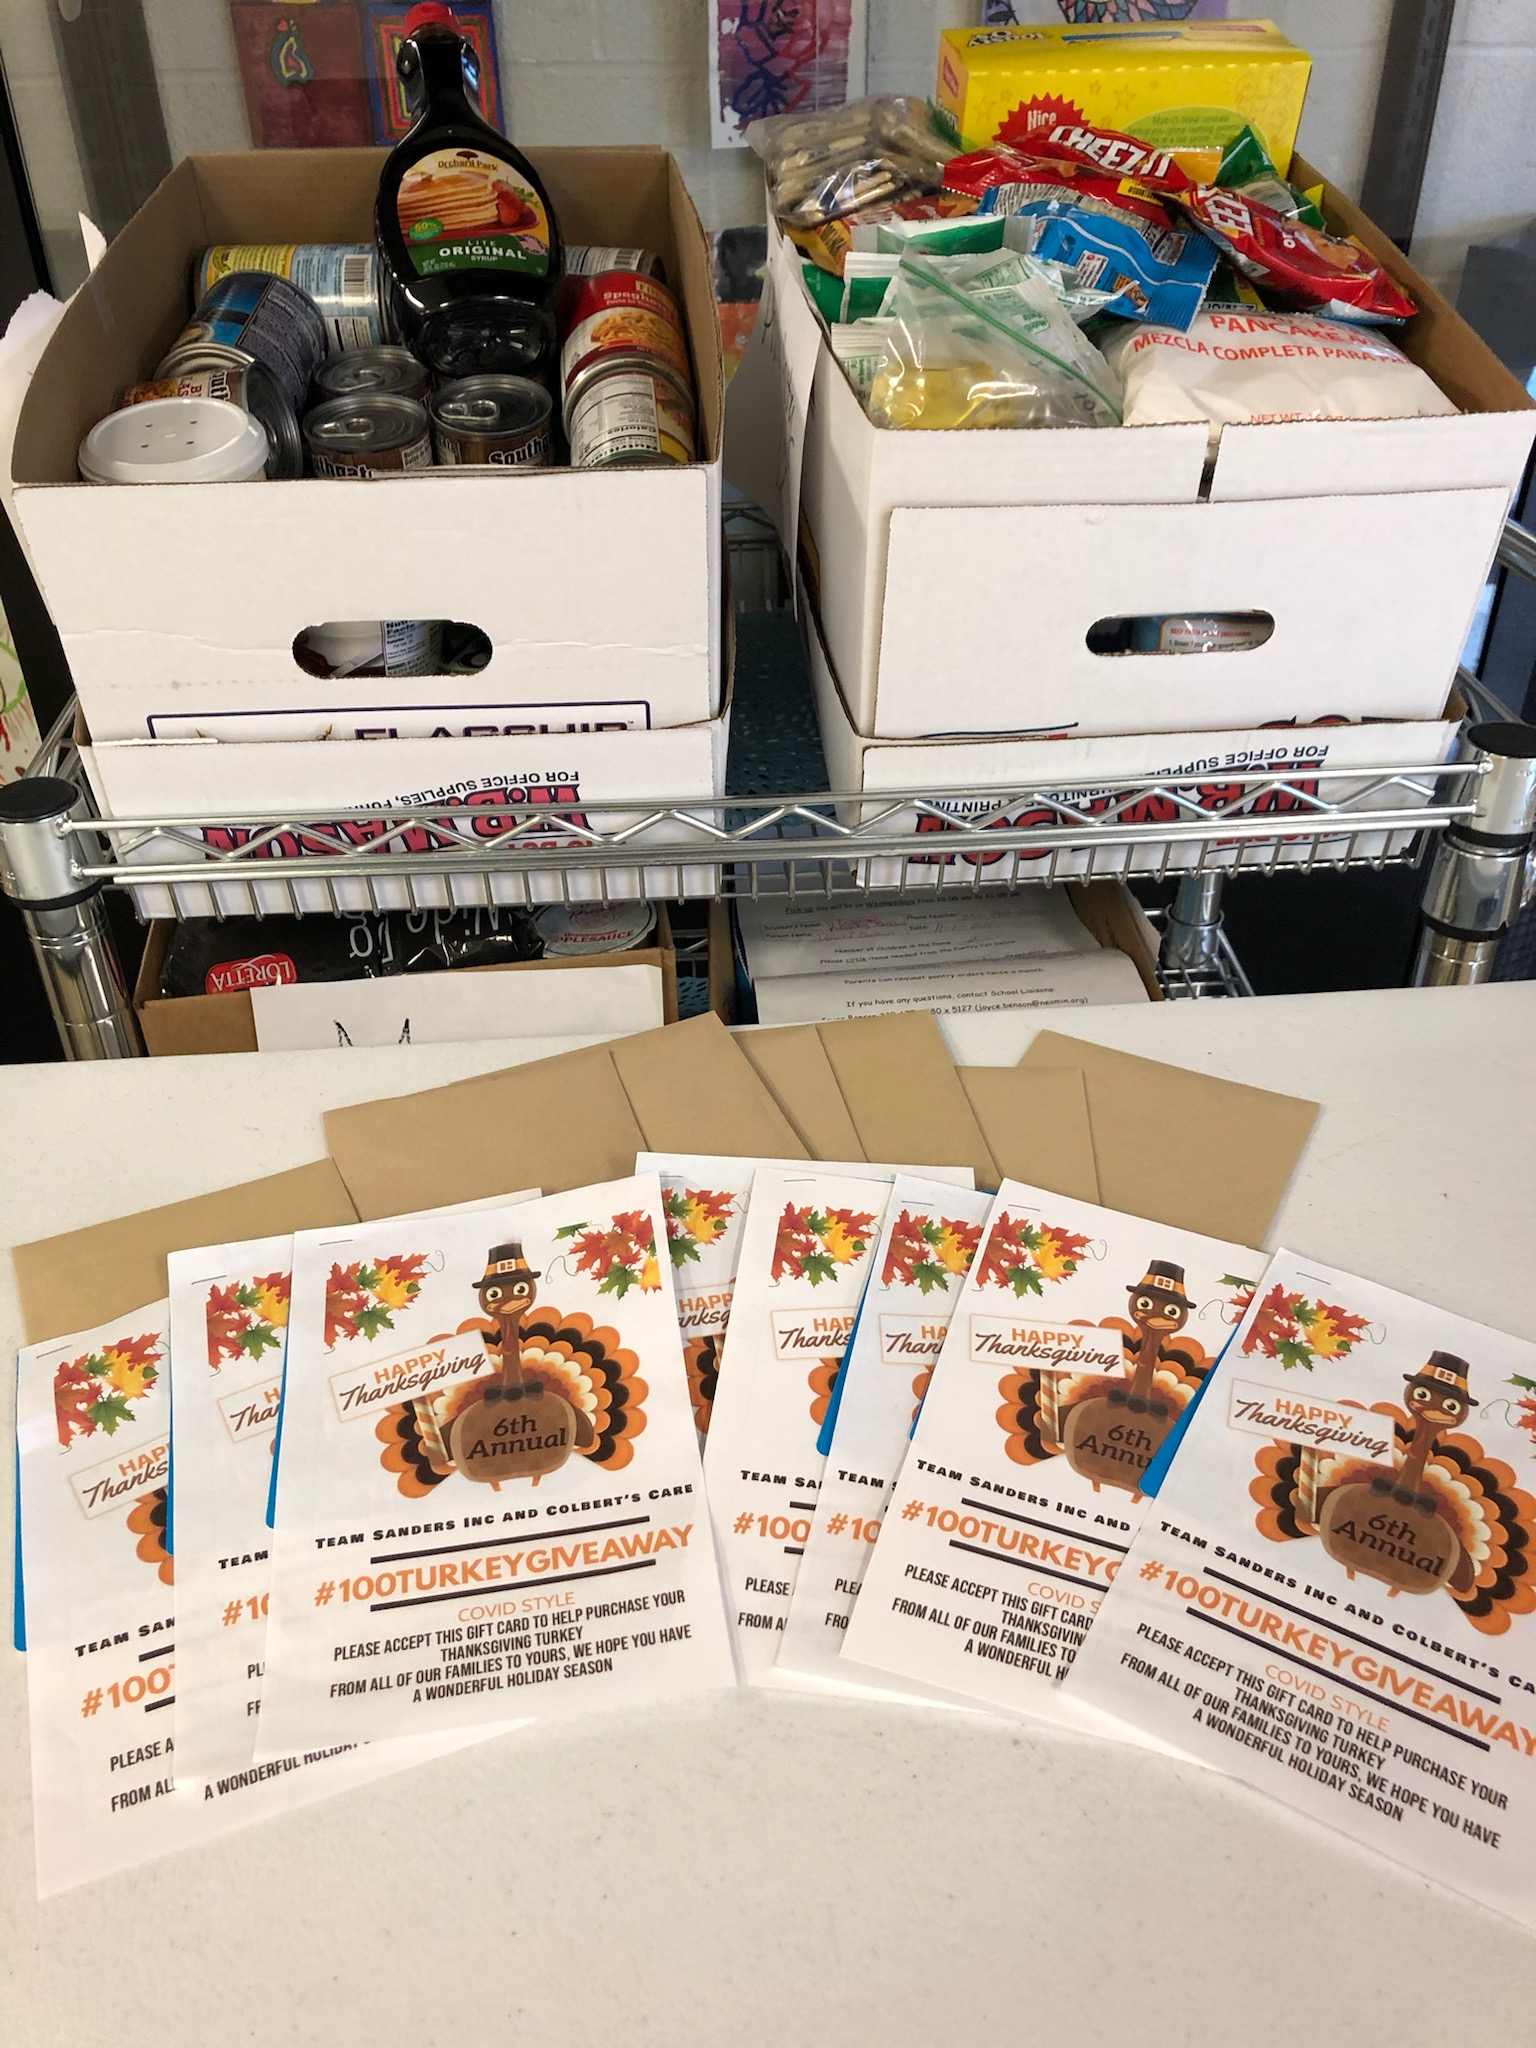 McGuffey received 8 gift cards $10.00 each from Colbert's Care Team & Team Sanders. These gift cards will go to McGuffey Families in need of food for Thanksgiving. Also families will be receiving cards made by 6-8 Student Council.